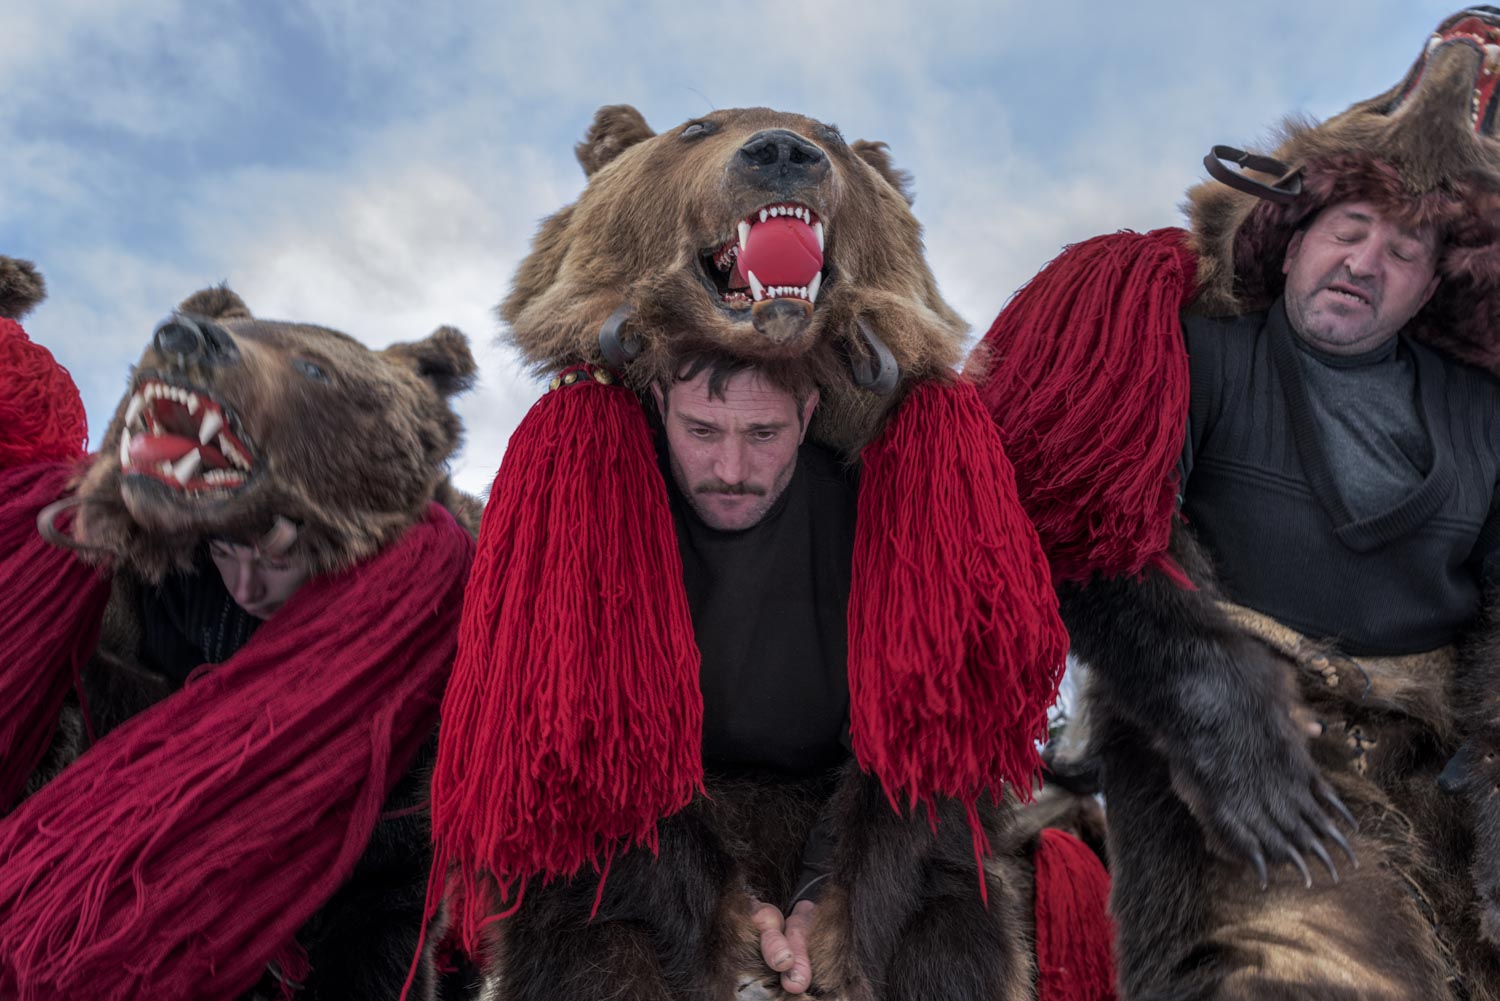  A troupe of bears from Asău village performs in central Comăneşti during the town's annual Bear Parade and Competition. December 30, 2014. Comăneşti town, Bacău county, Romania. 